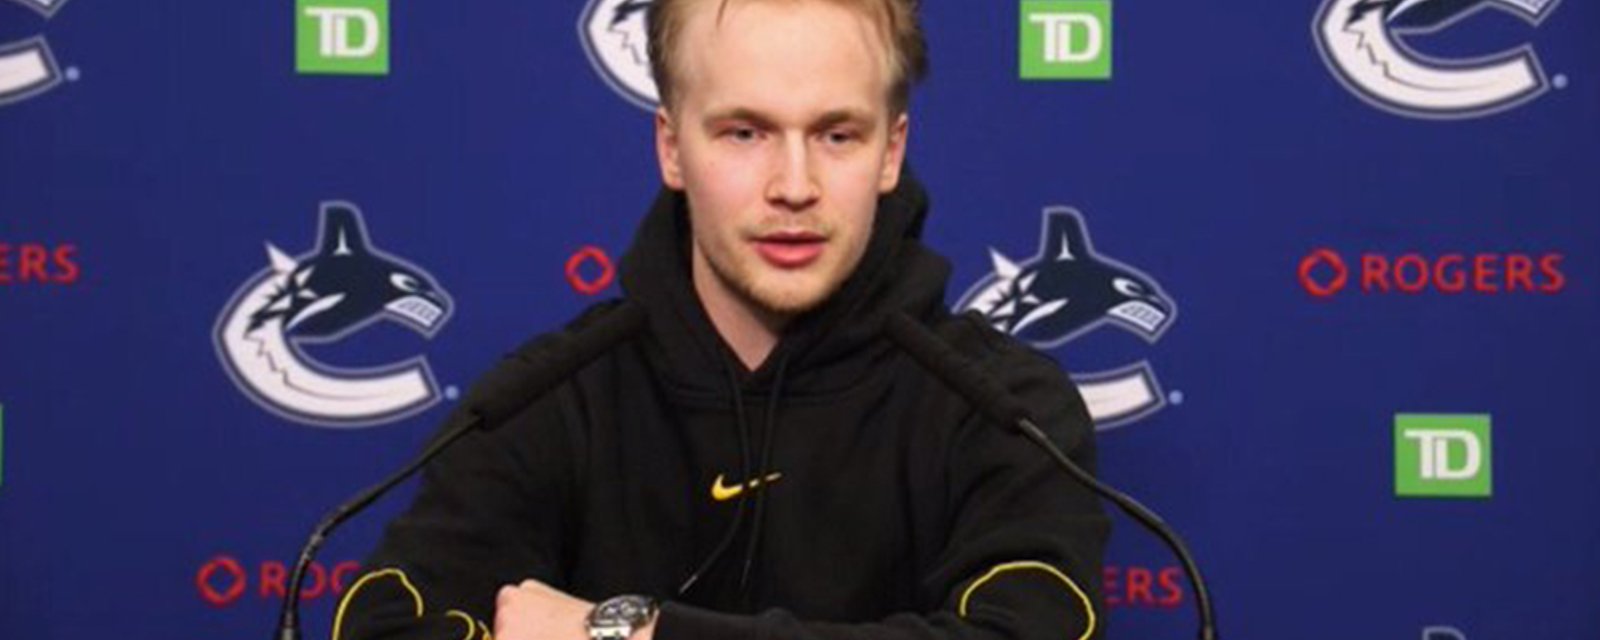 Pettersson discloses his injury, talks about contract negotiations and potentially “playing elsewhere”